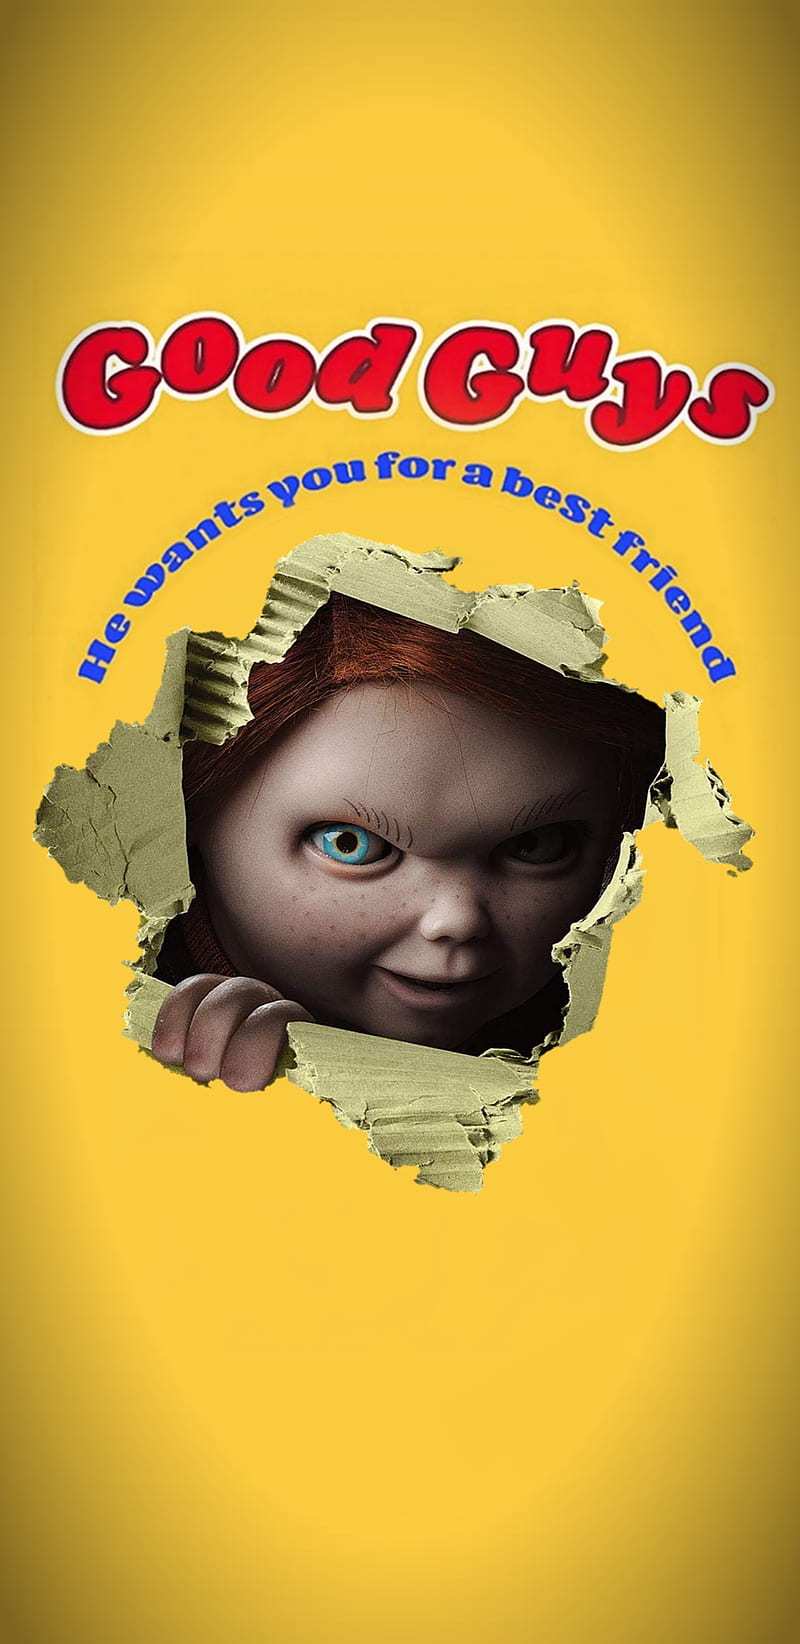 Share more than 58 chucky iphone wallpaper - in.cdgdbentre